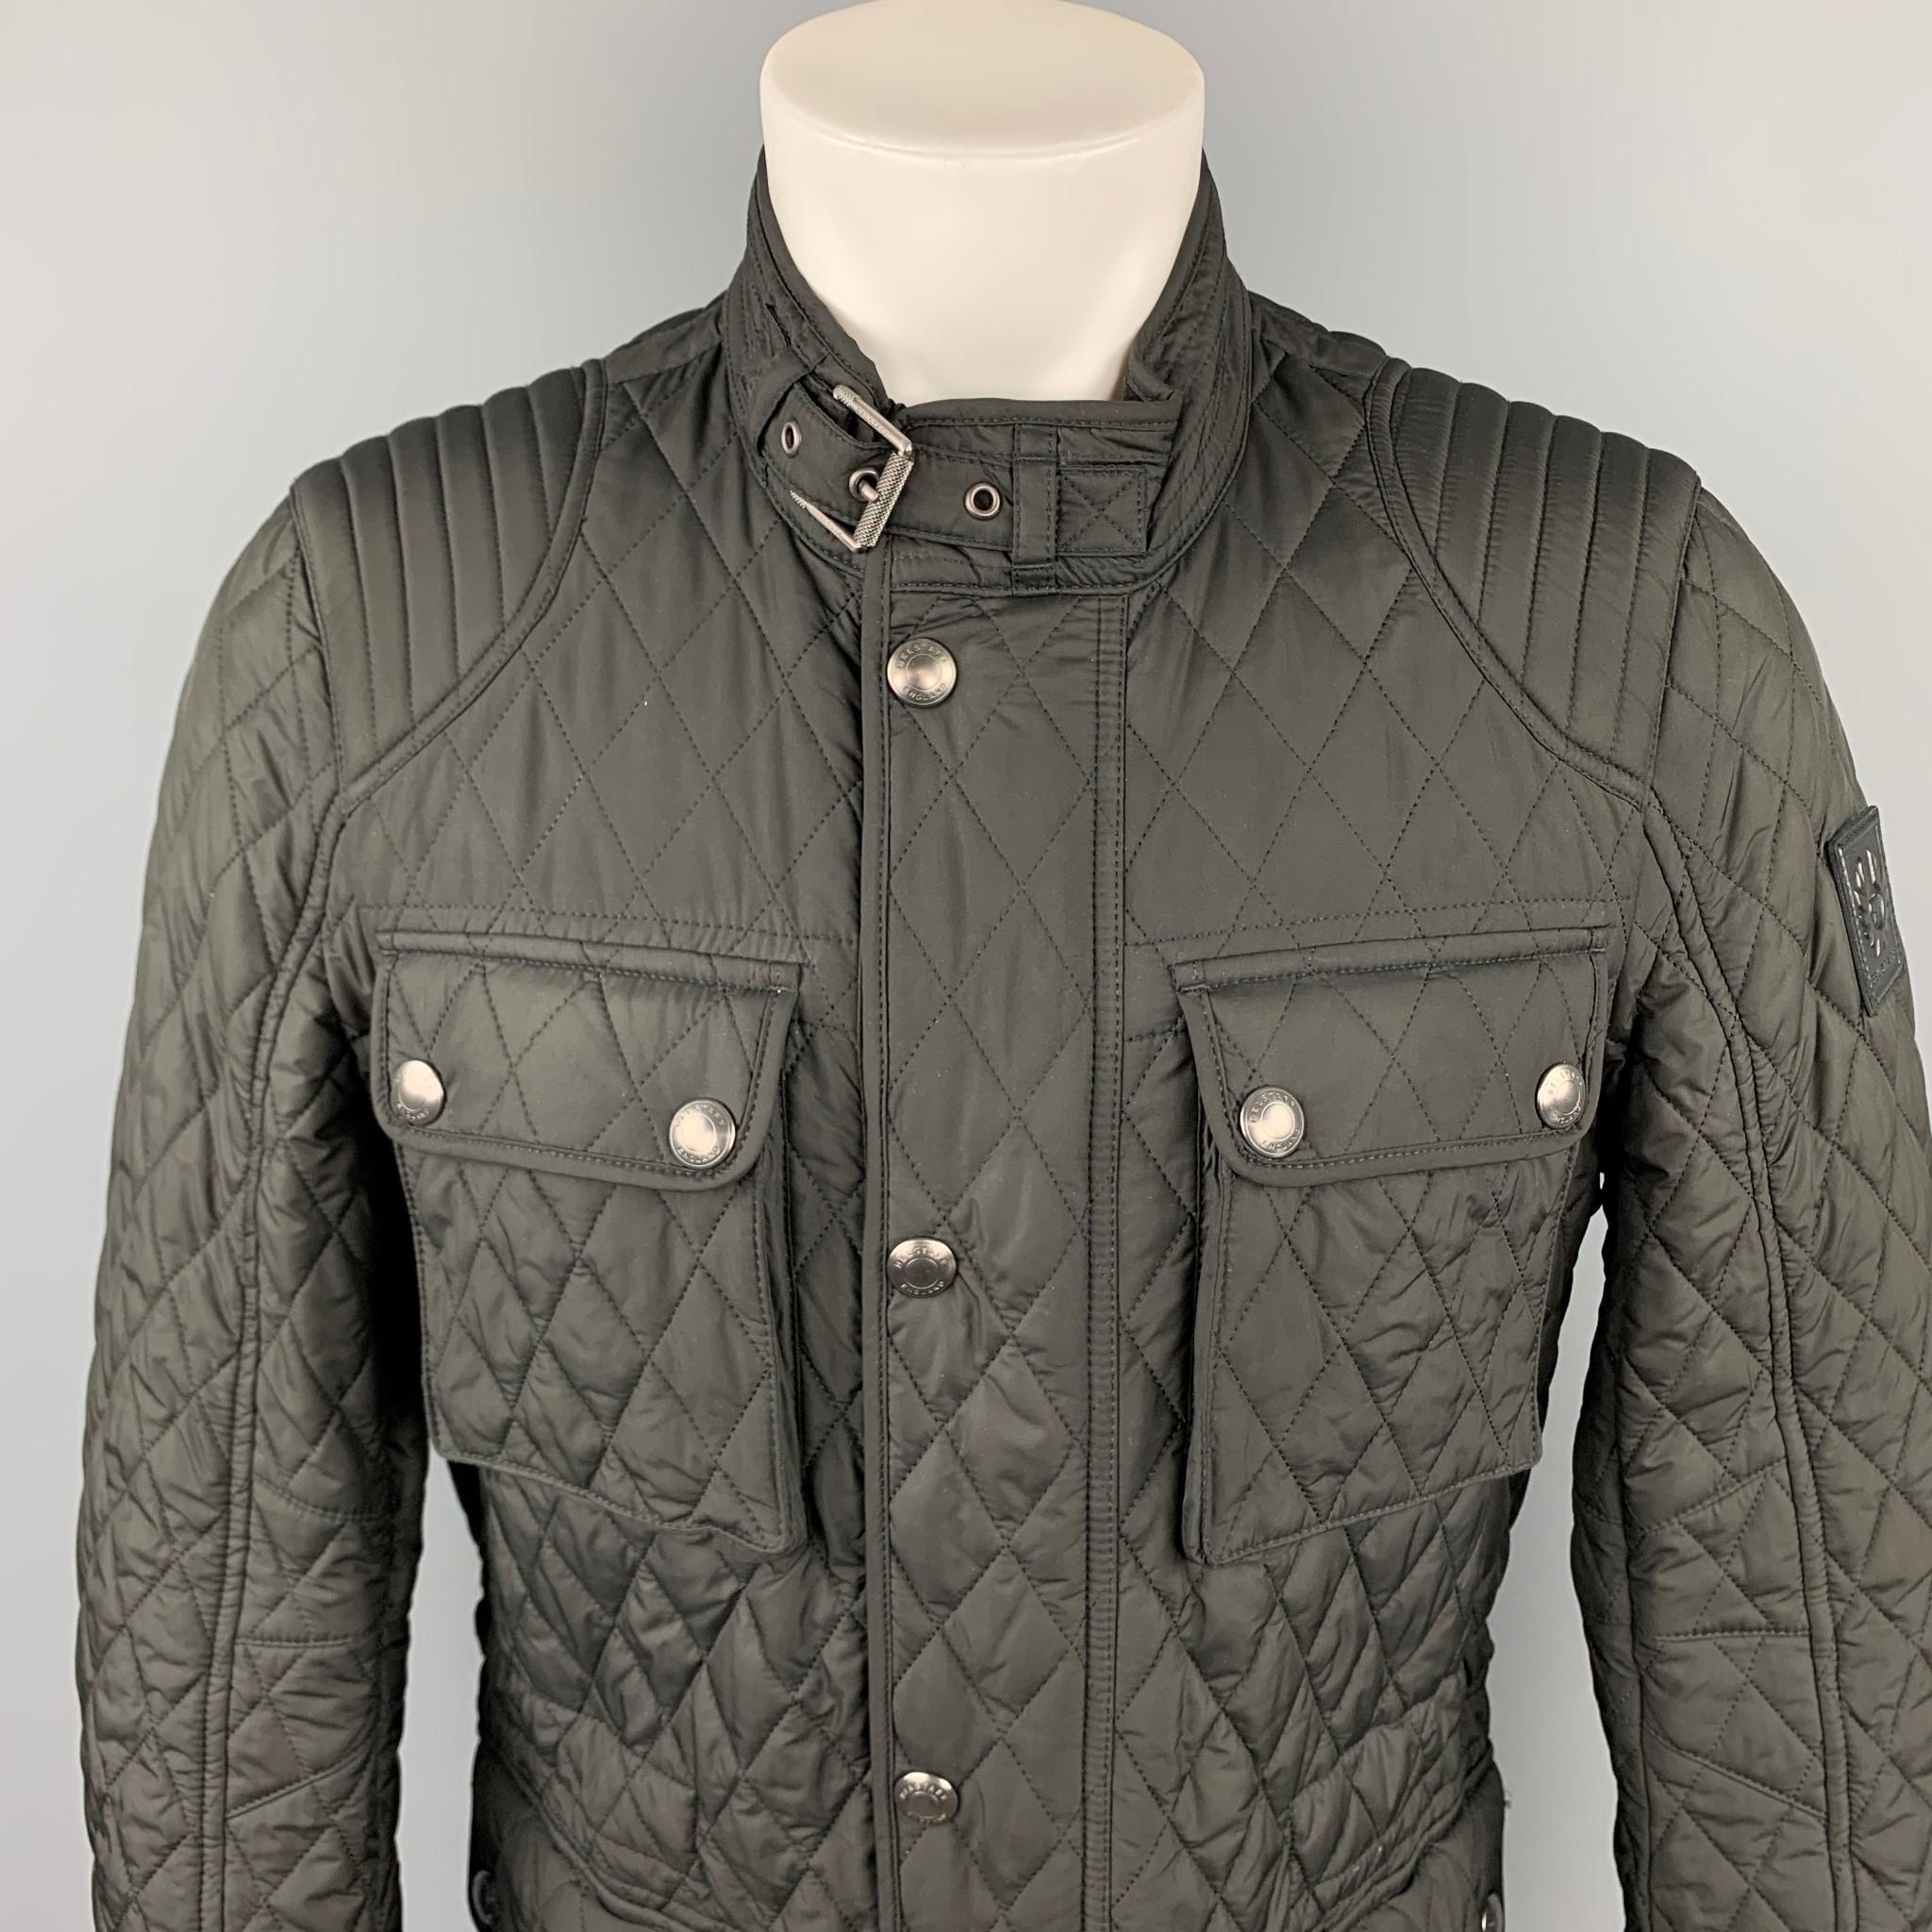 BELSTAFF jacket comes in a black quilted polyester with a plaid liner featuring patch pockets, strap collar, and a zip and snap button collar. Made in Bulgaria.

Very Good Pre-Owned Condition.
Marked: 50

Measurements:

Shoulder: 18 in.
Chest: 42